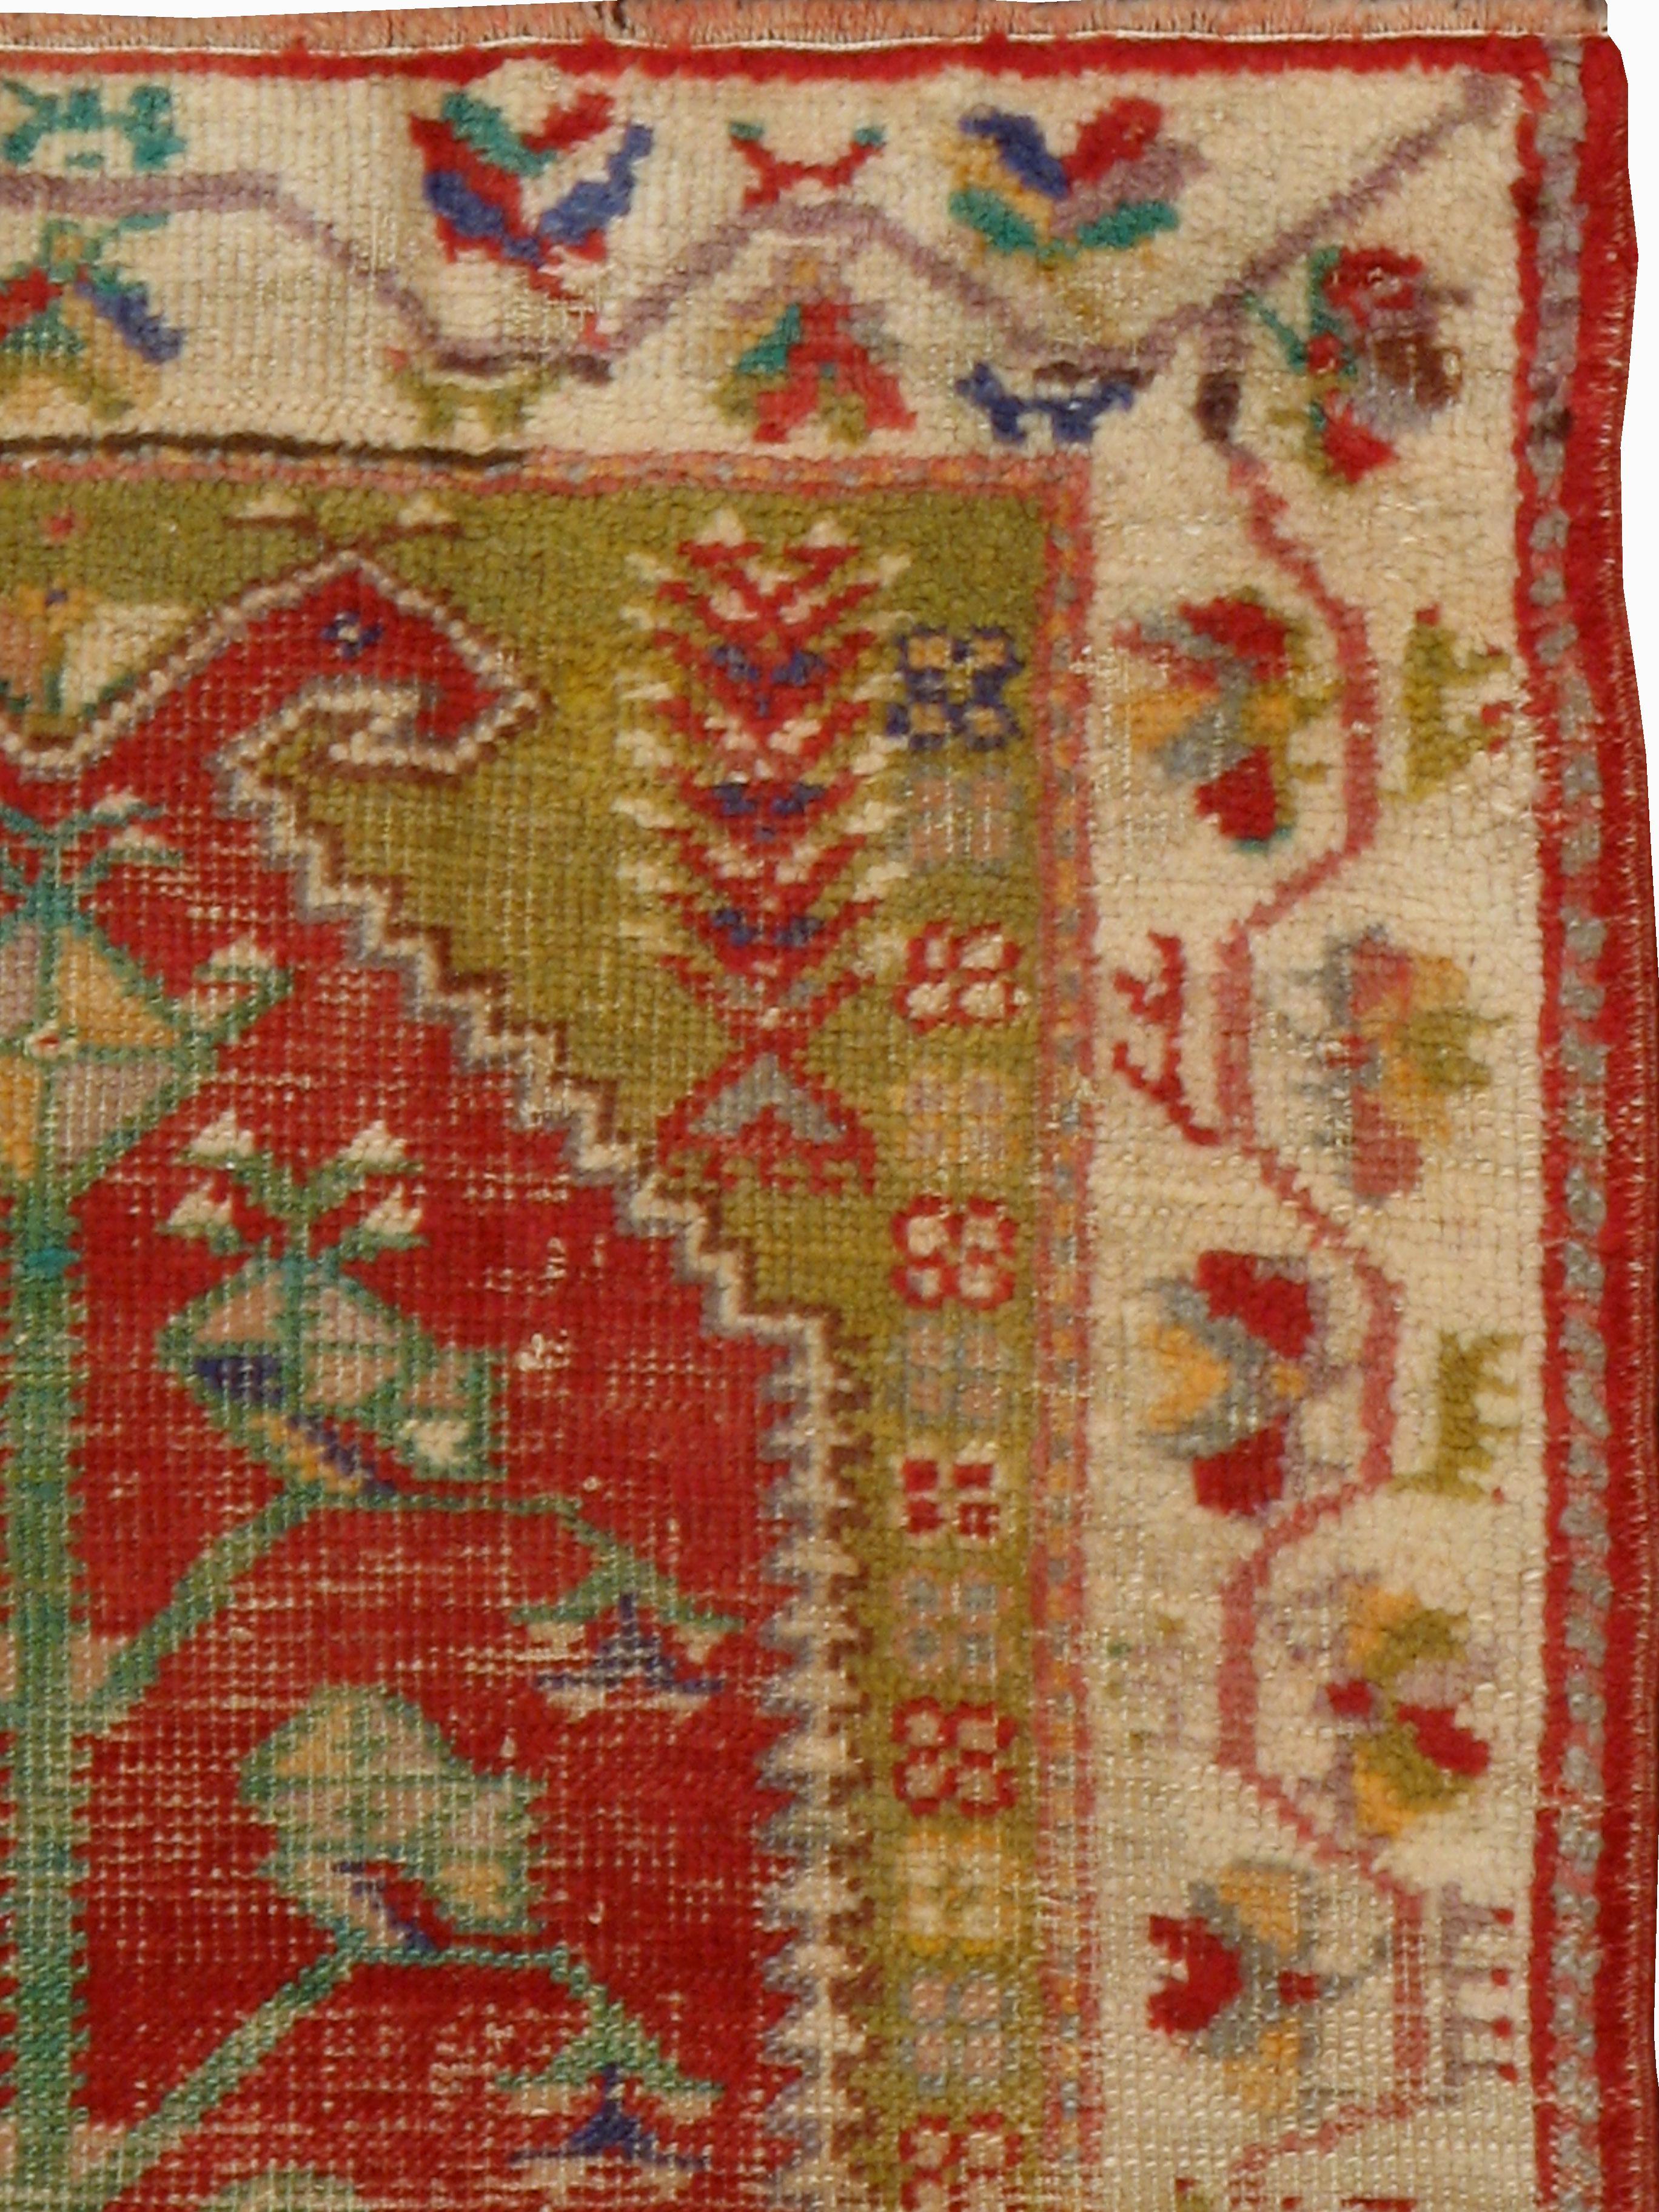 An antique Turkish Oushak rug from the early 20th century with a distressed appeal, but in strong and durable condition.

Measures: 2' 8